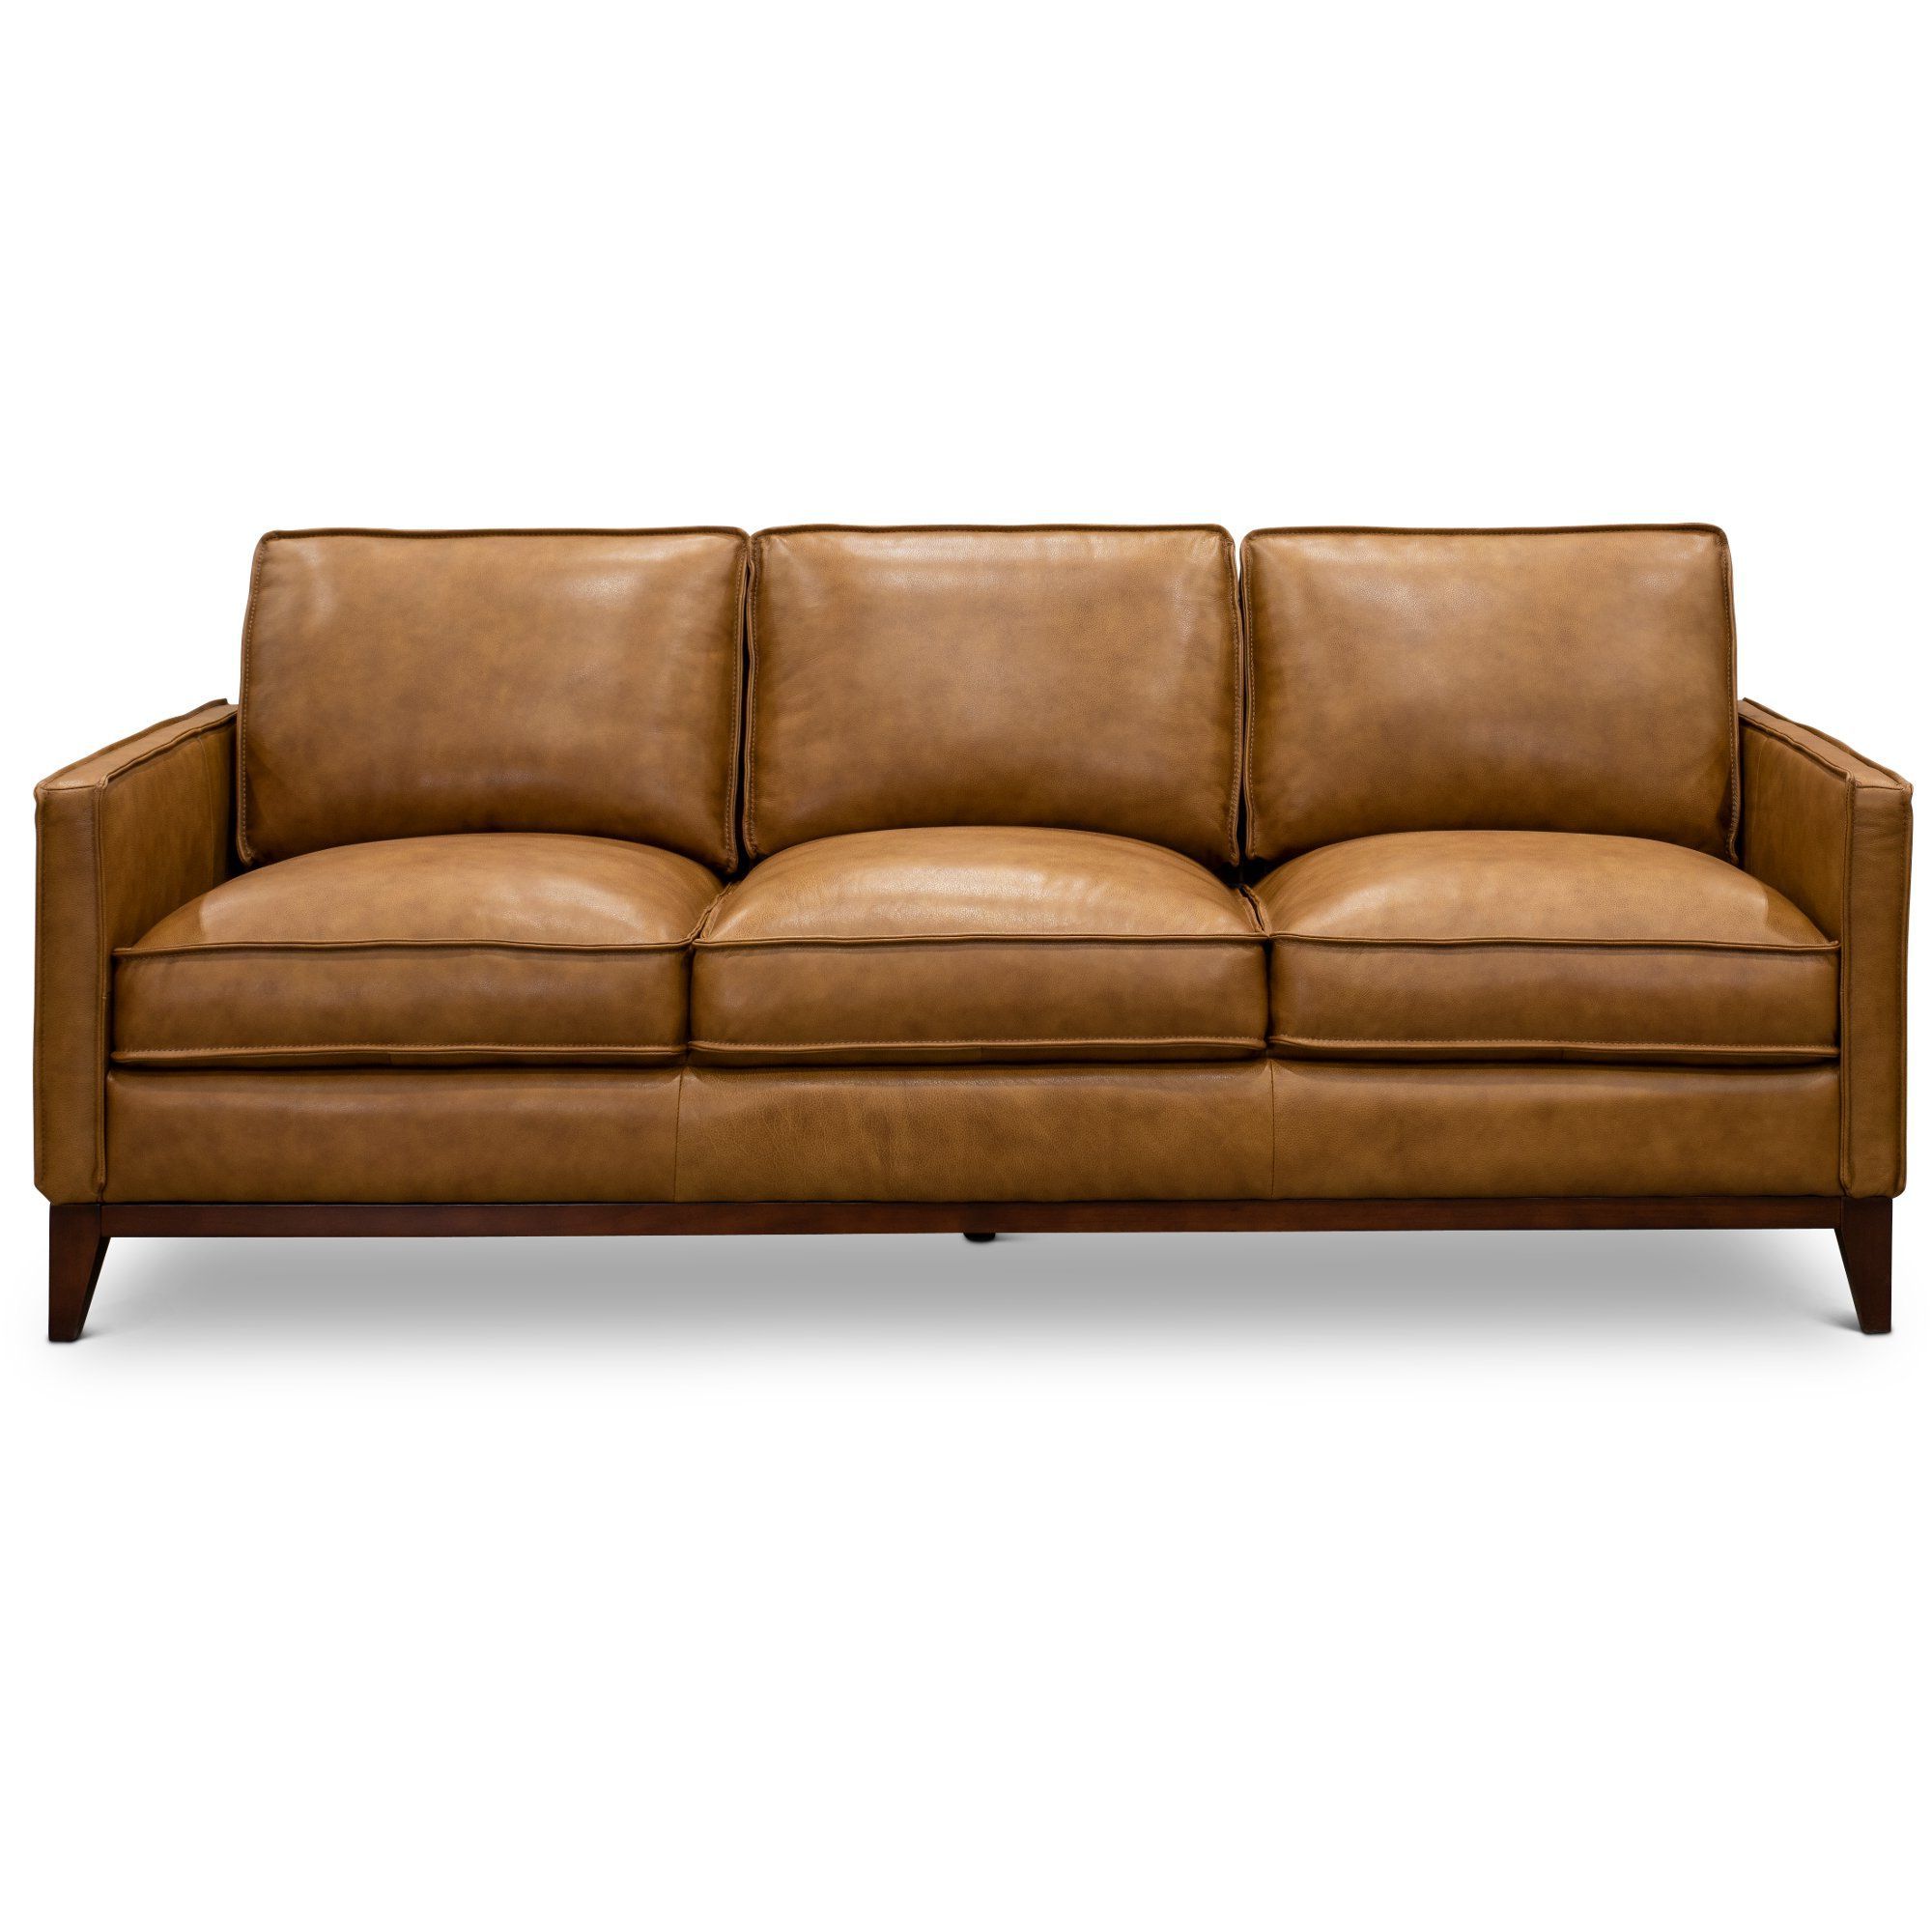 Mid Century Modern Sofas With Regard To Well Known Mid Century Modern Camel Brown Leather Sofa – Newport – Dekorationcity (View 12 of 15)